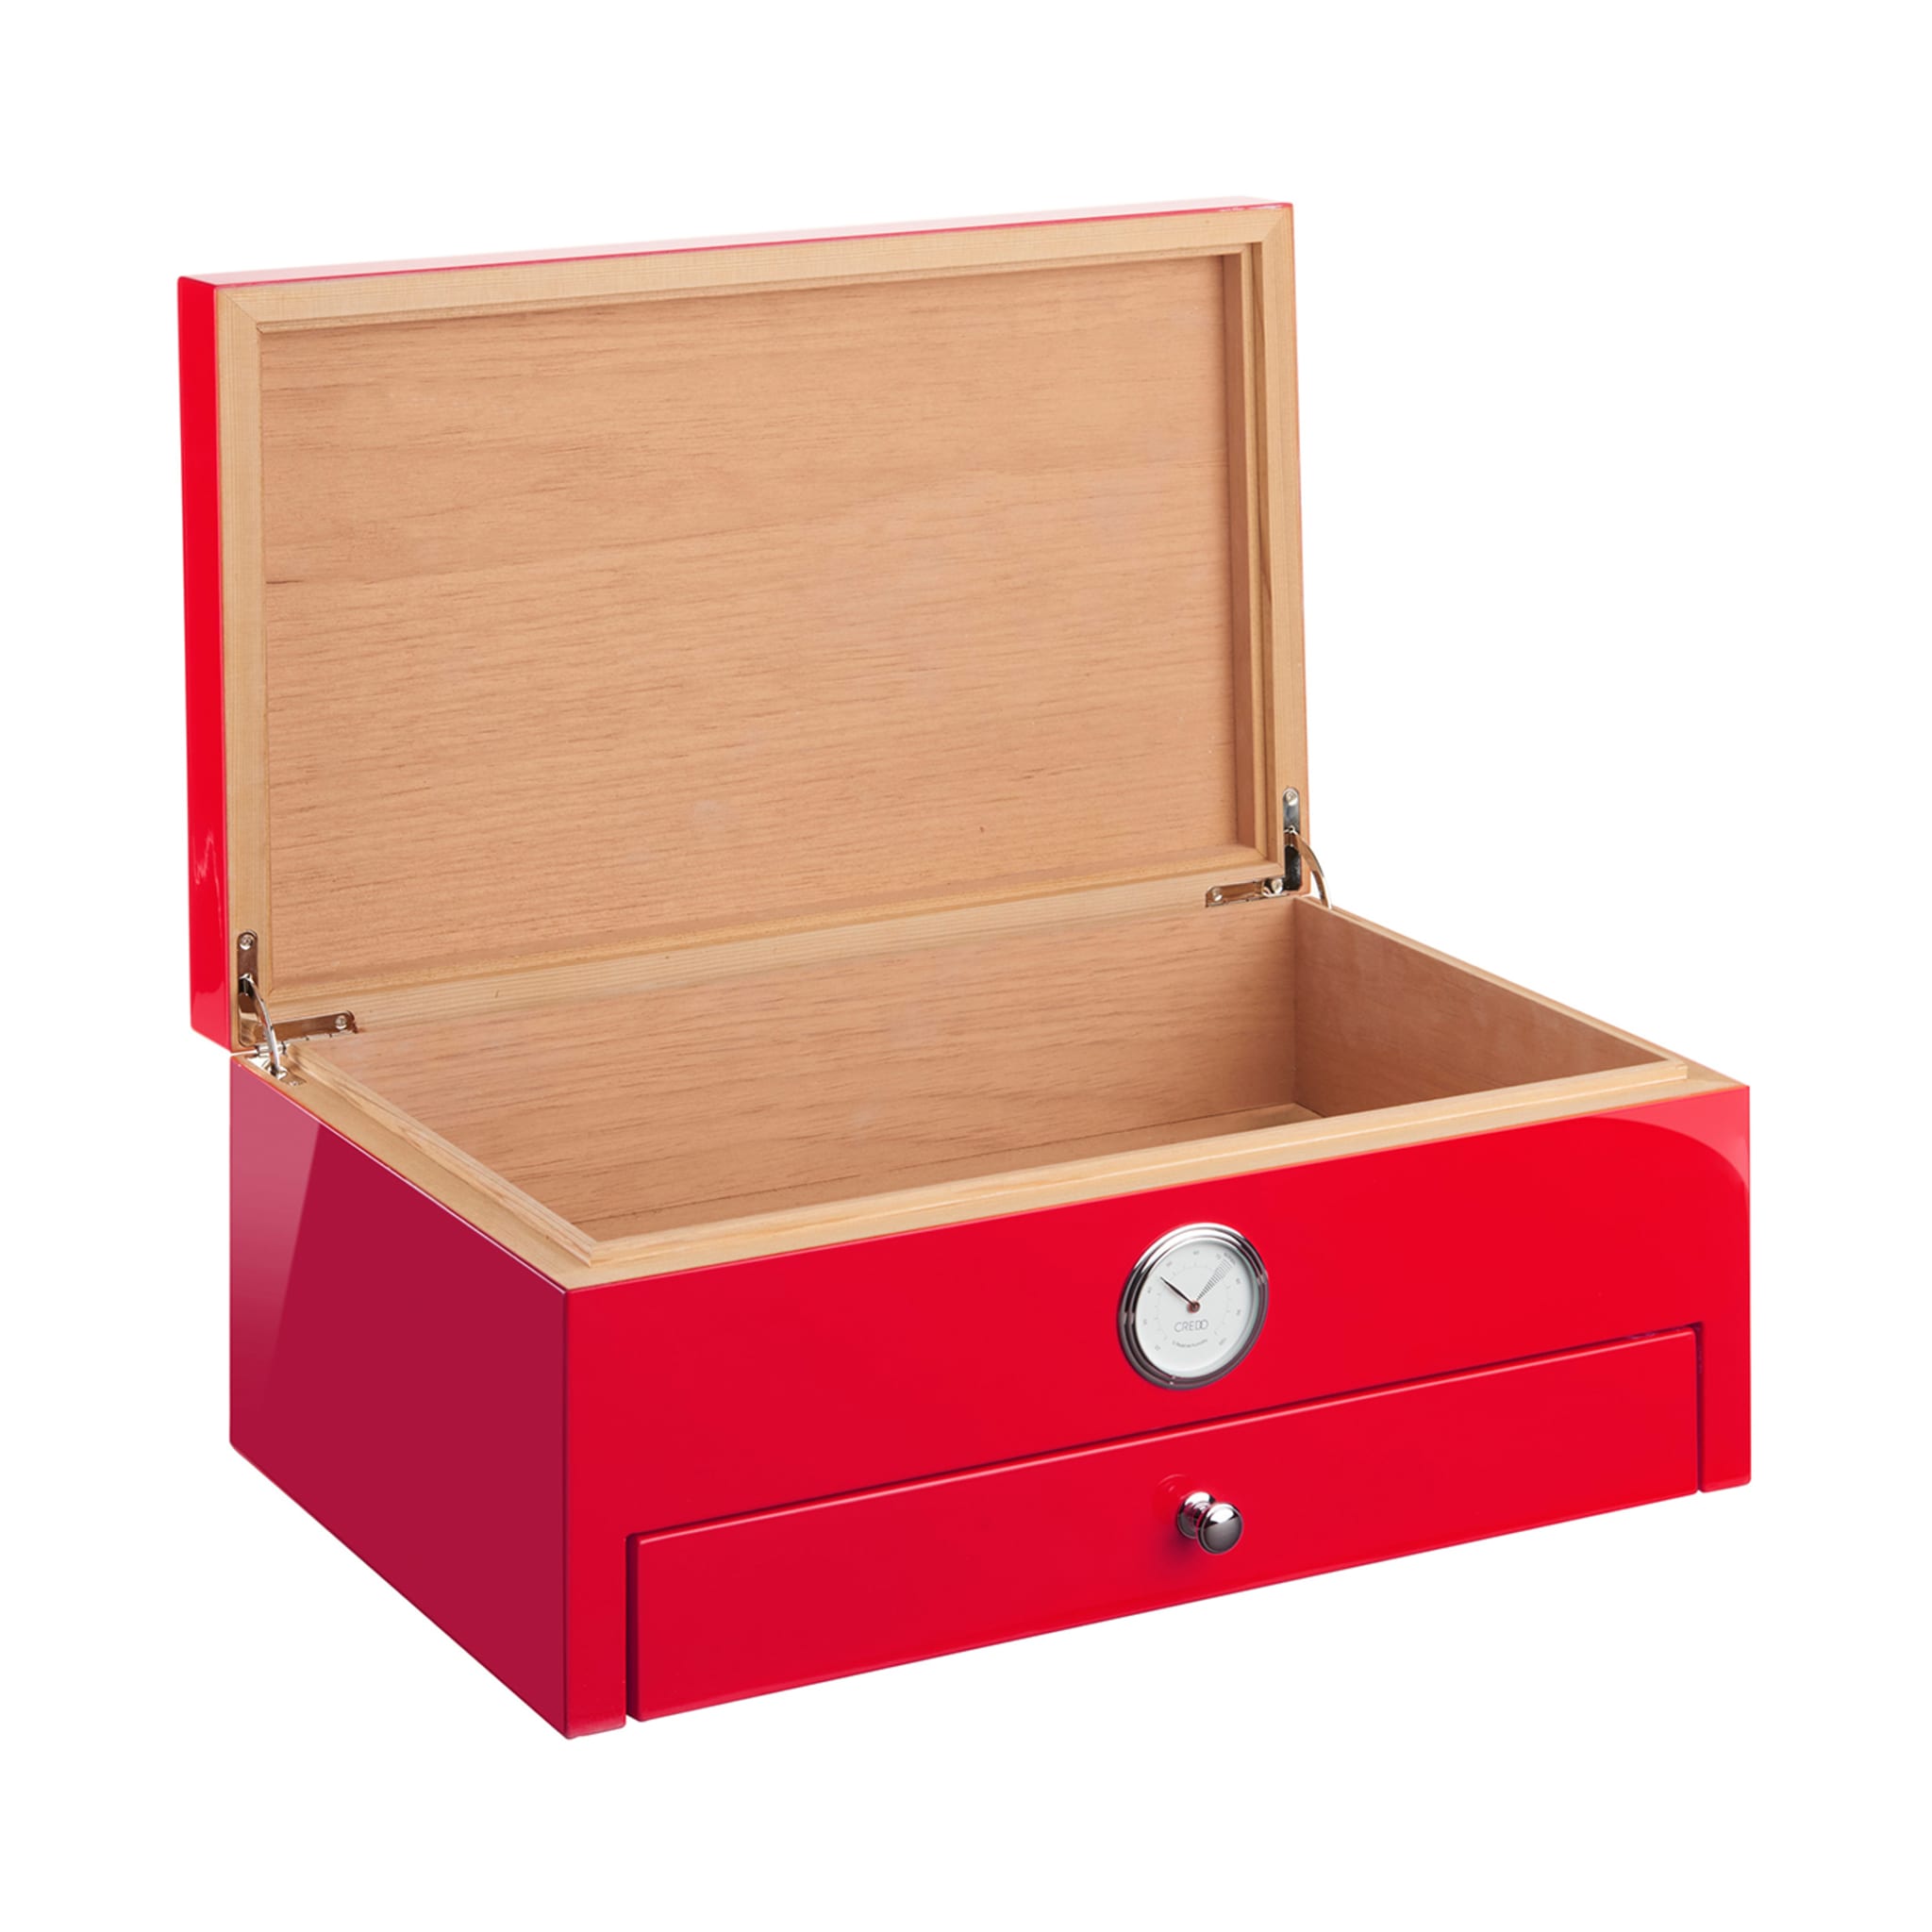 Cuba-inspired Red Humidor (Special Club Edition)  - Alternative view 2